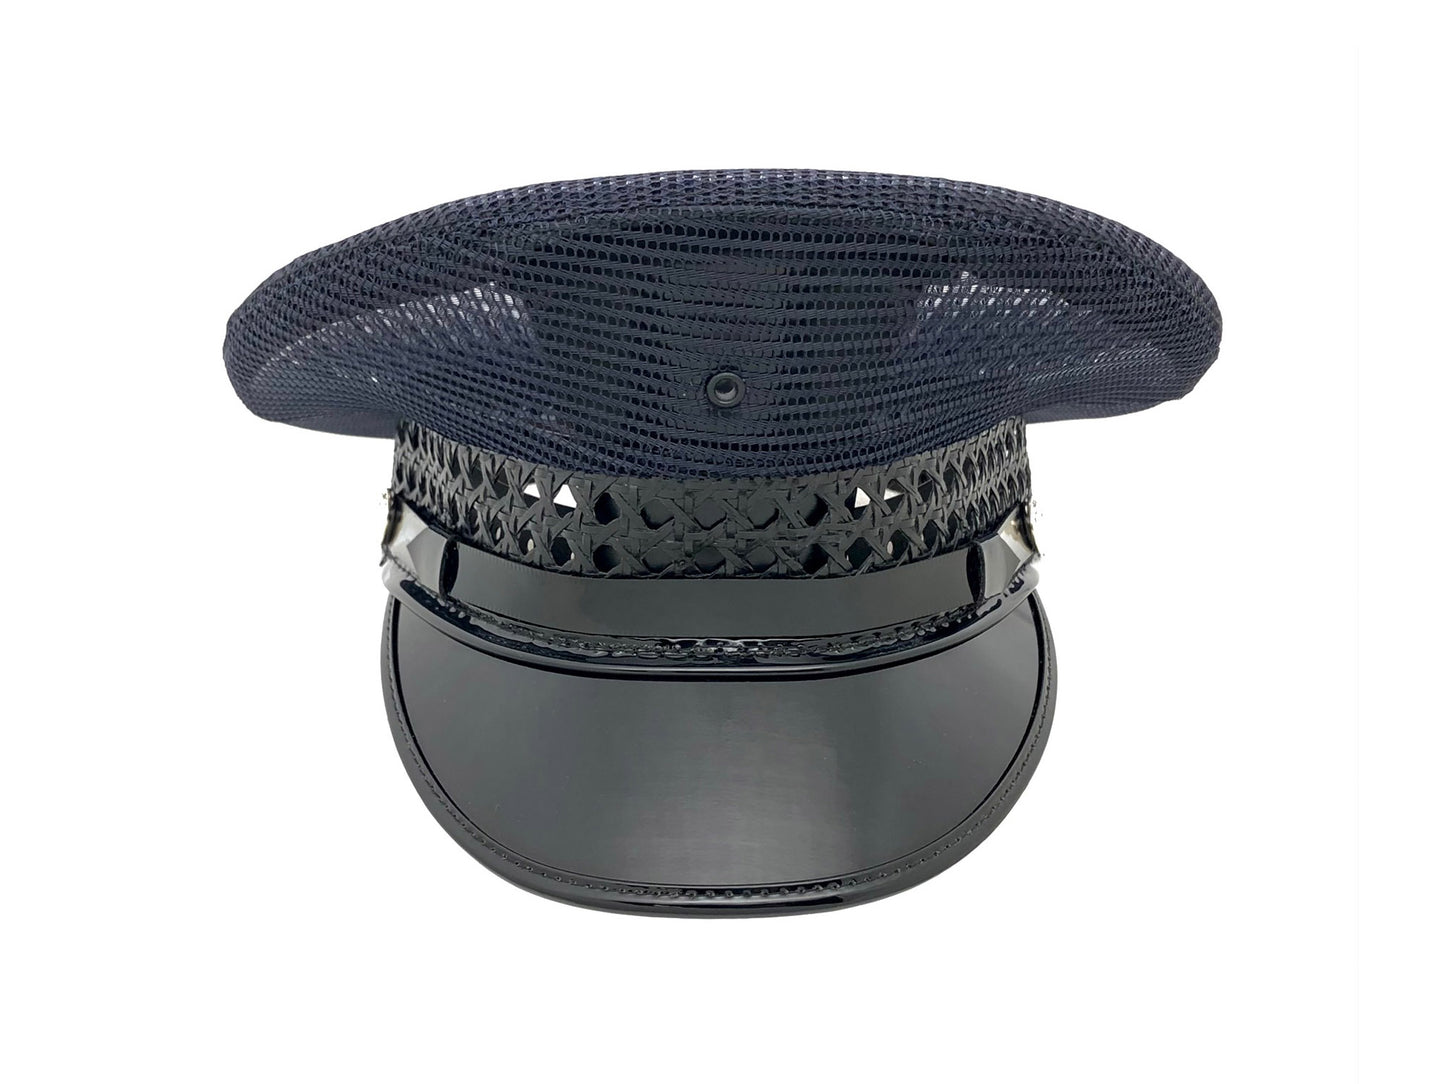 L-9A Air Force Round Top Cap with Open Cane